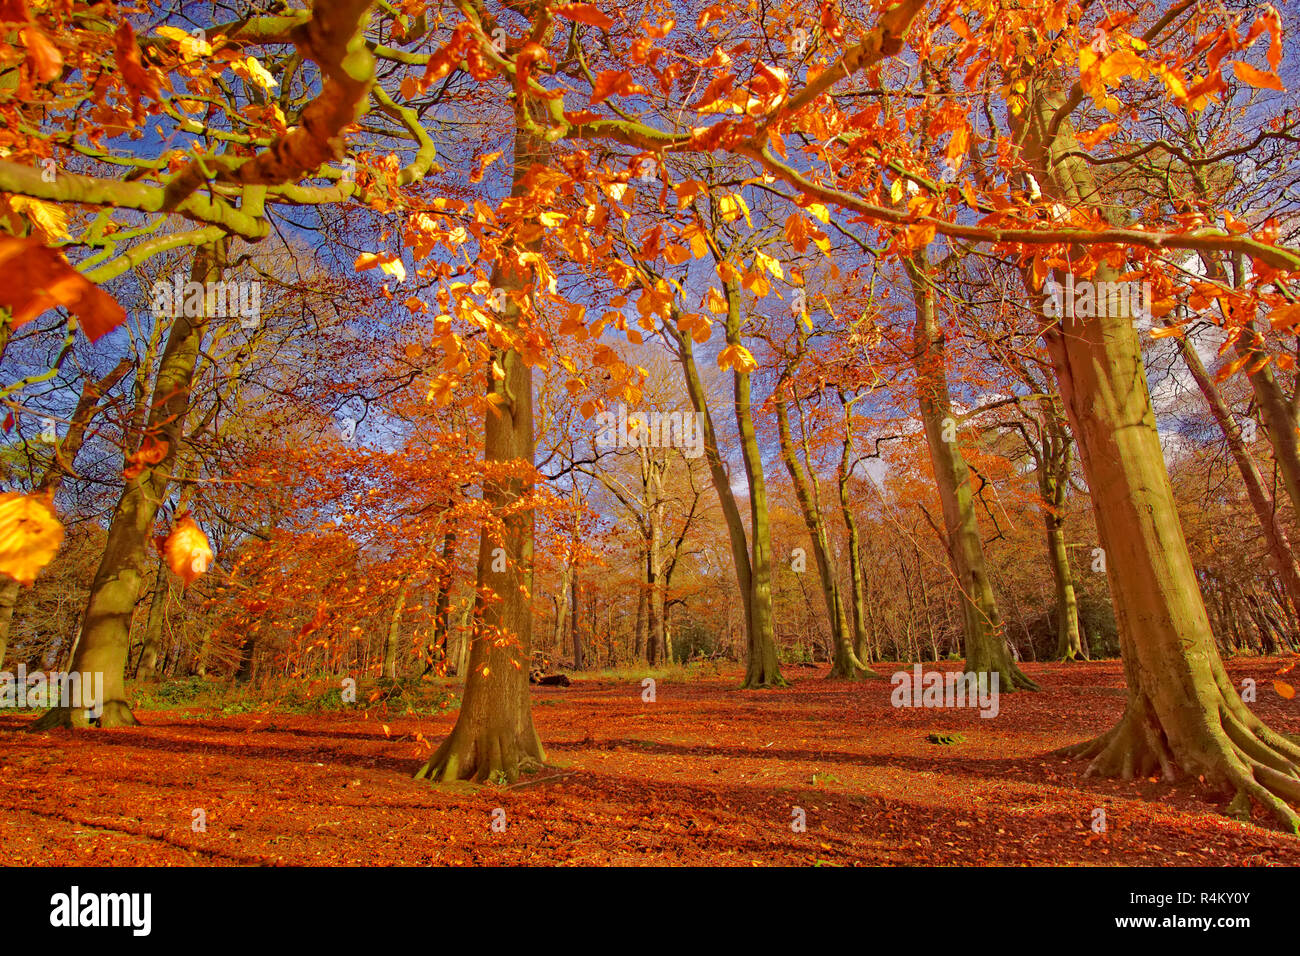 Autumn at Alderley Edge Woods, near Wilmslow, in Cheshire, England. UK. Stock Photo